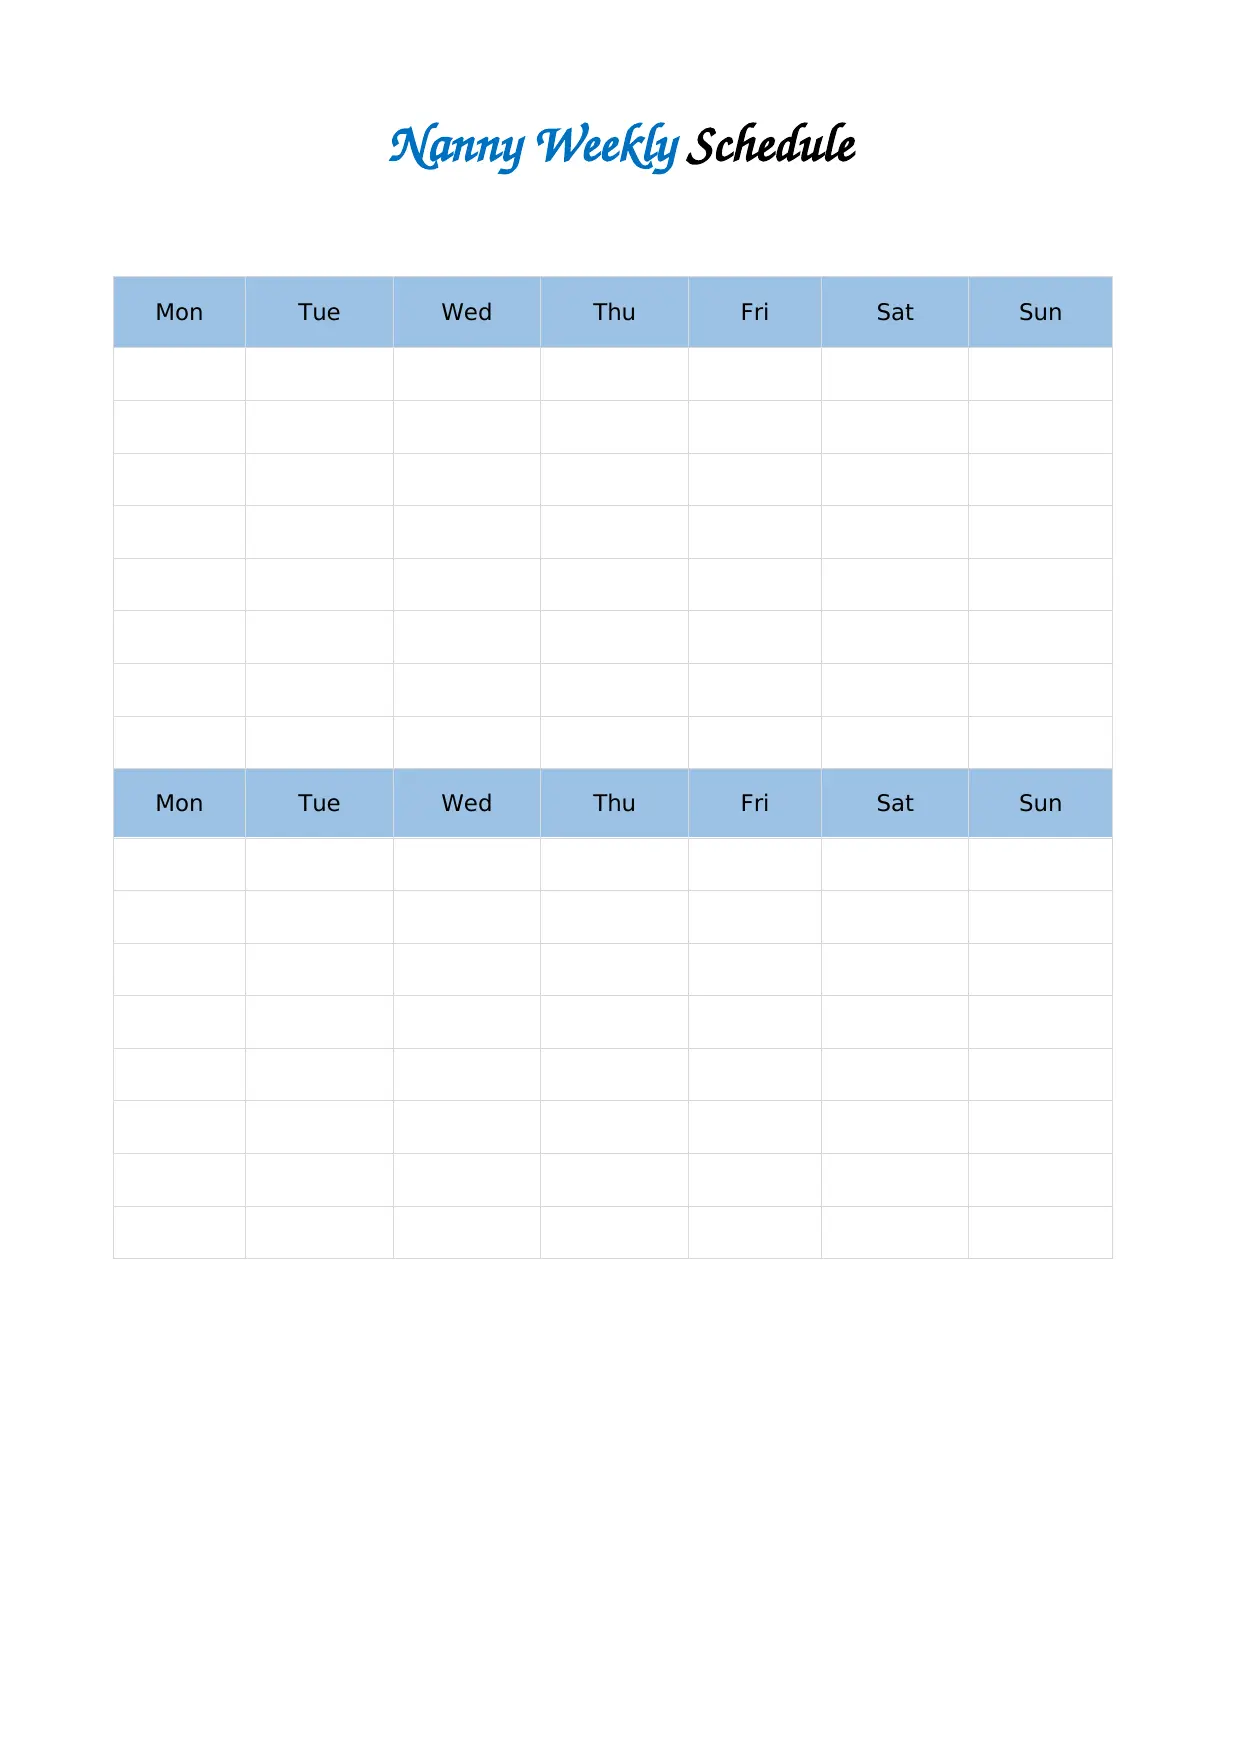 Nanny Weekly Schedule Template